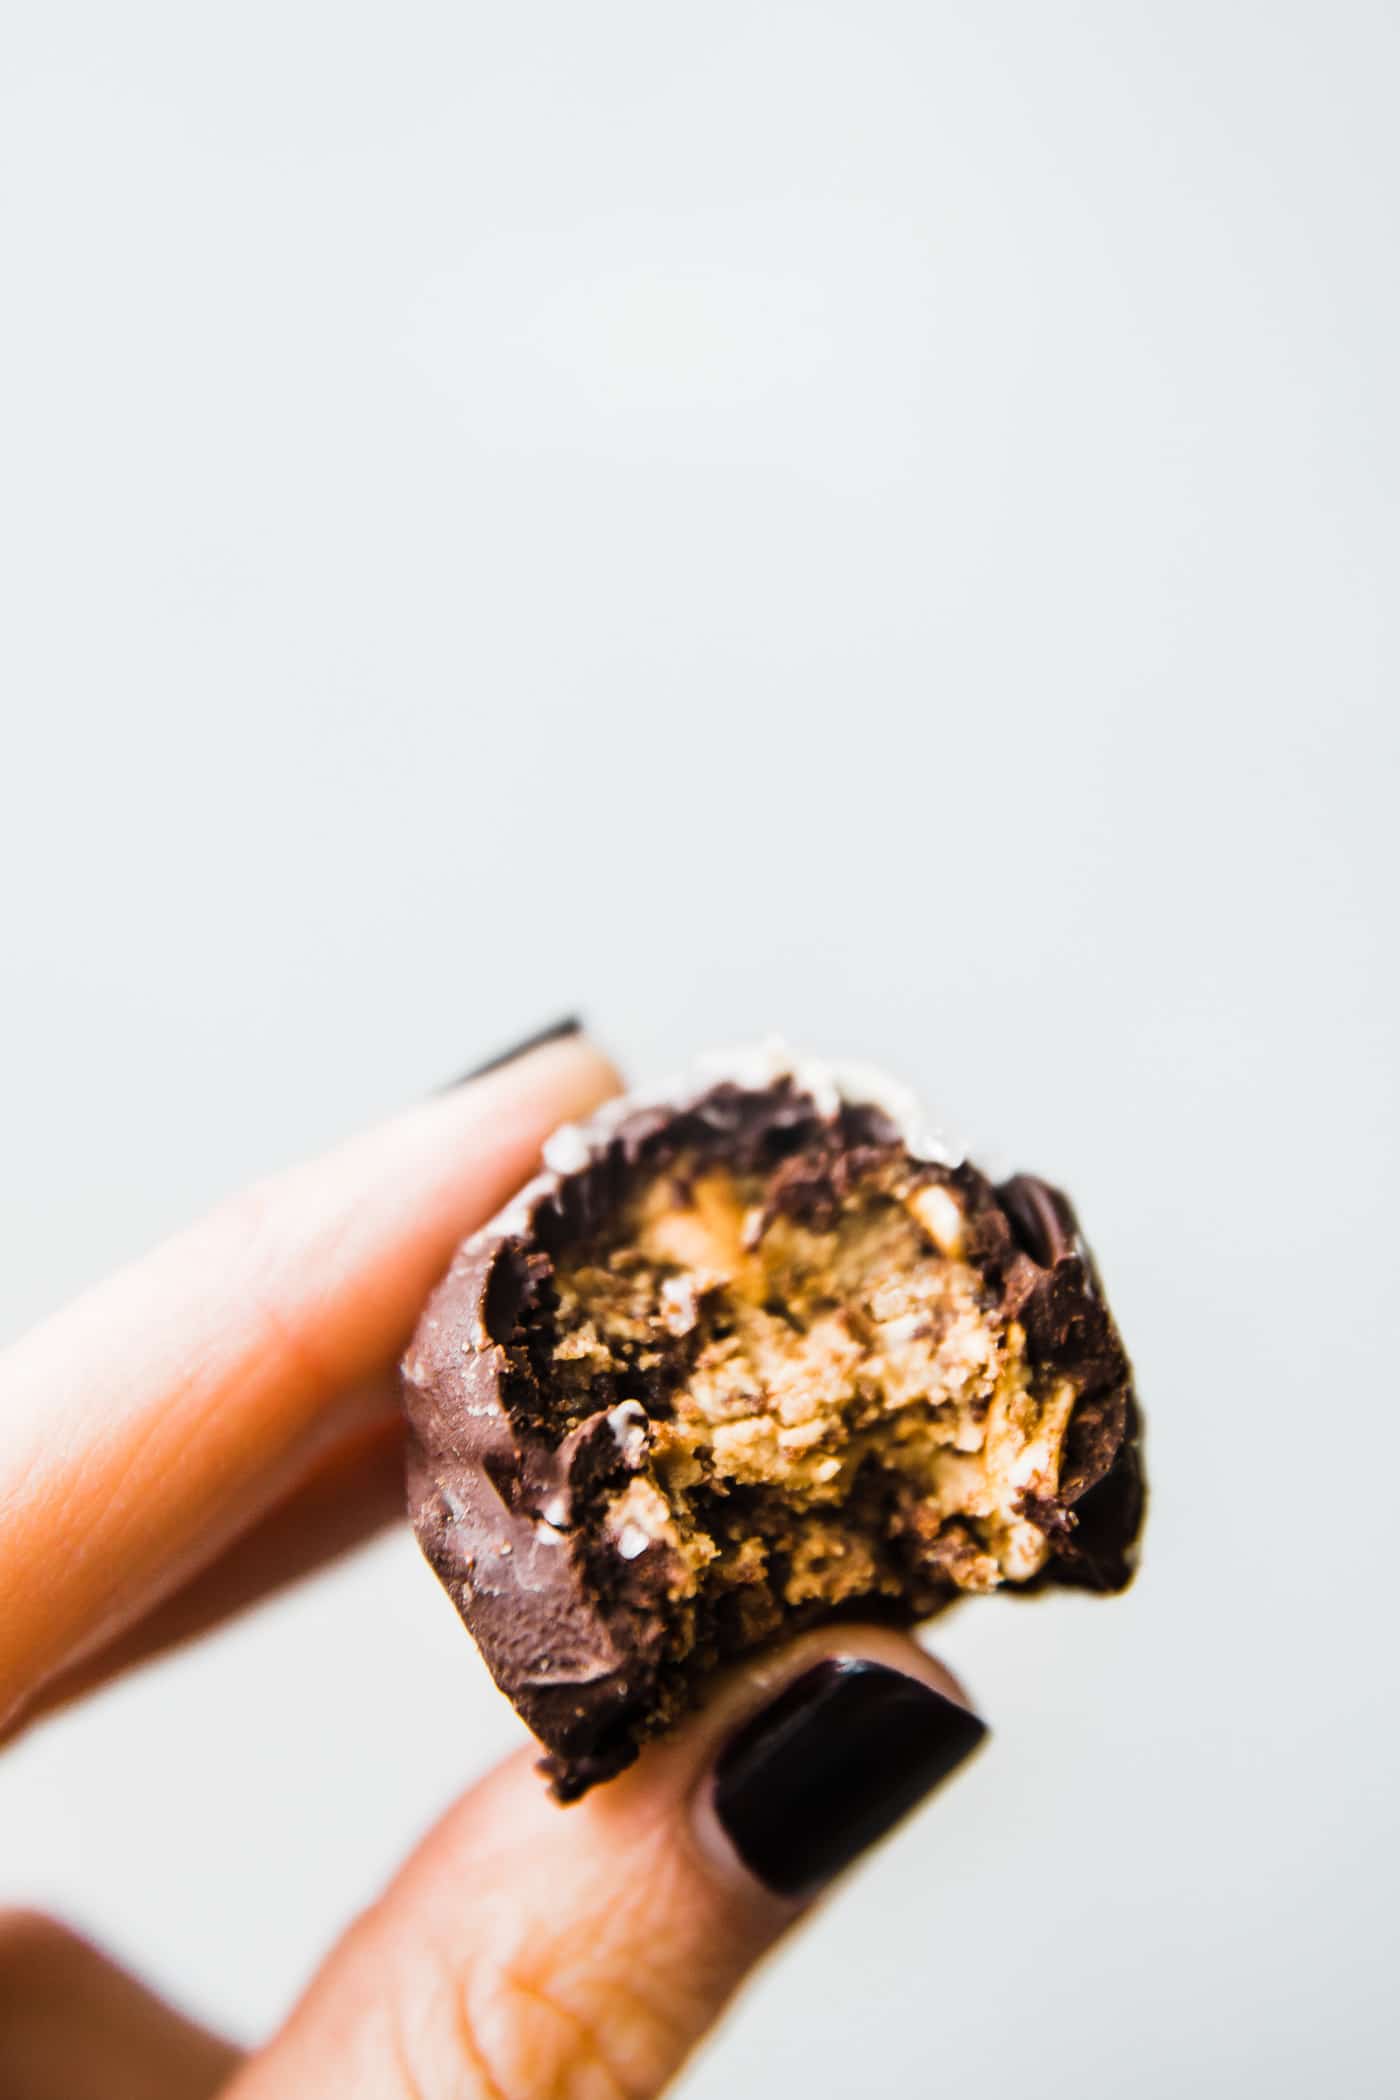 A cookie truffle coated in chocolate with bite taken out to show inside texture being held between thumb and forefinger.